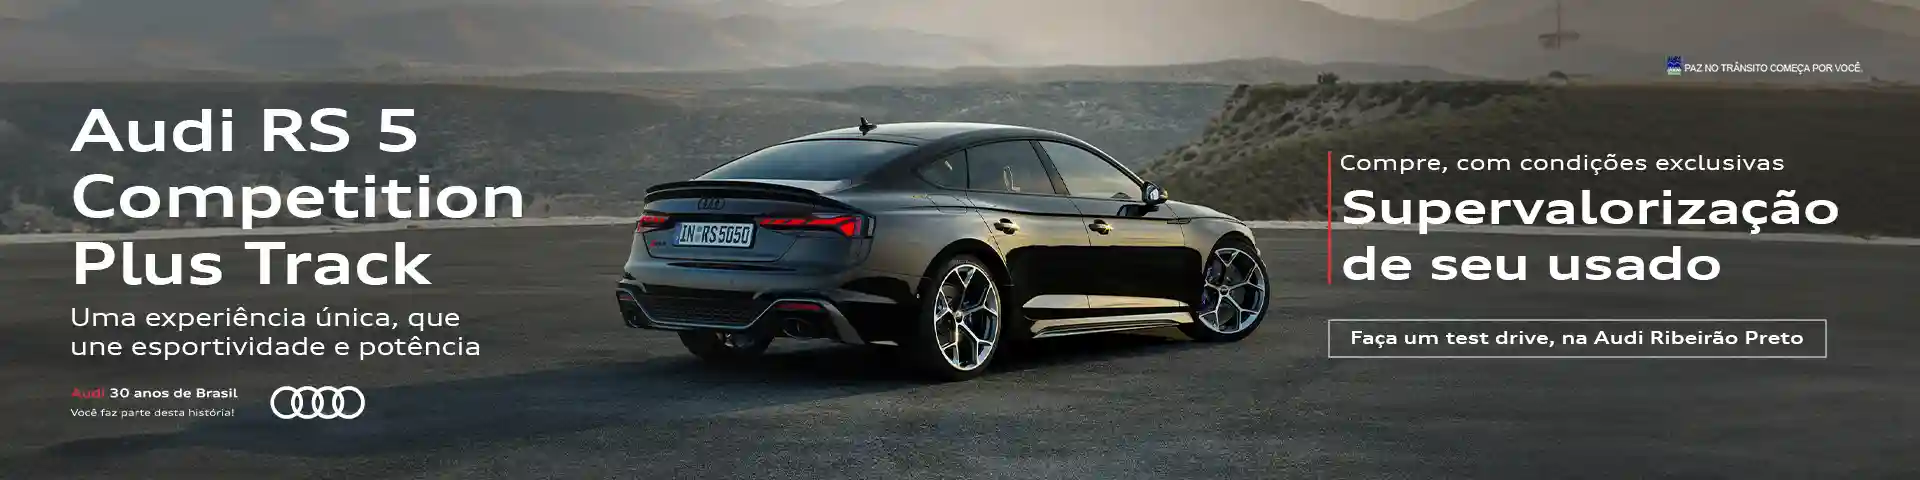 Audi RS5 COMPETITION